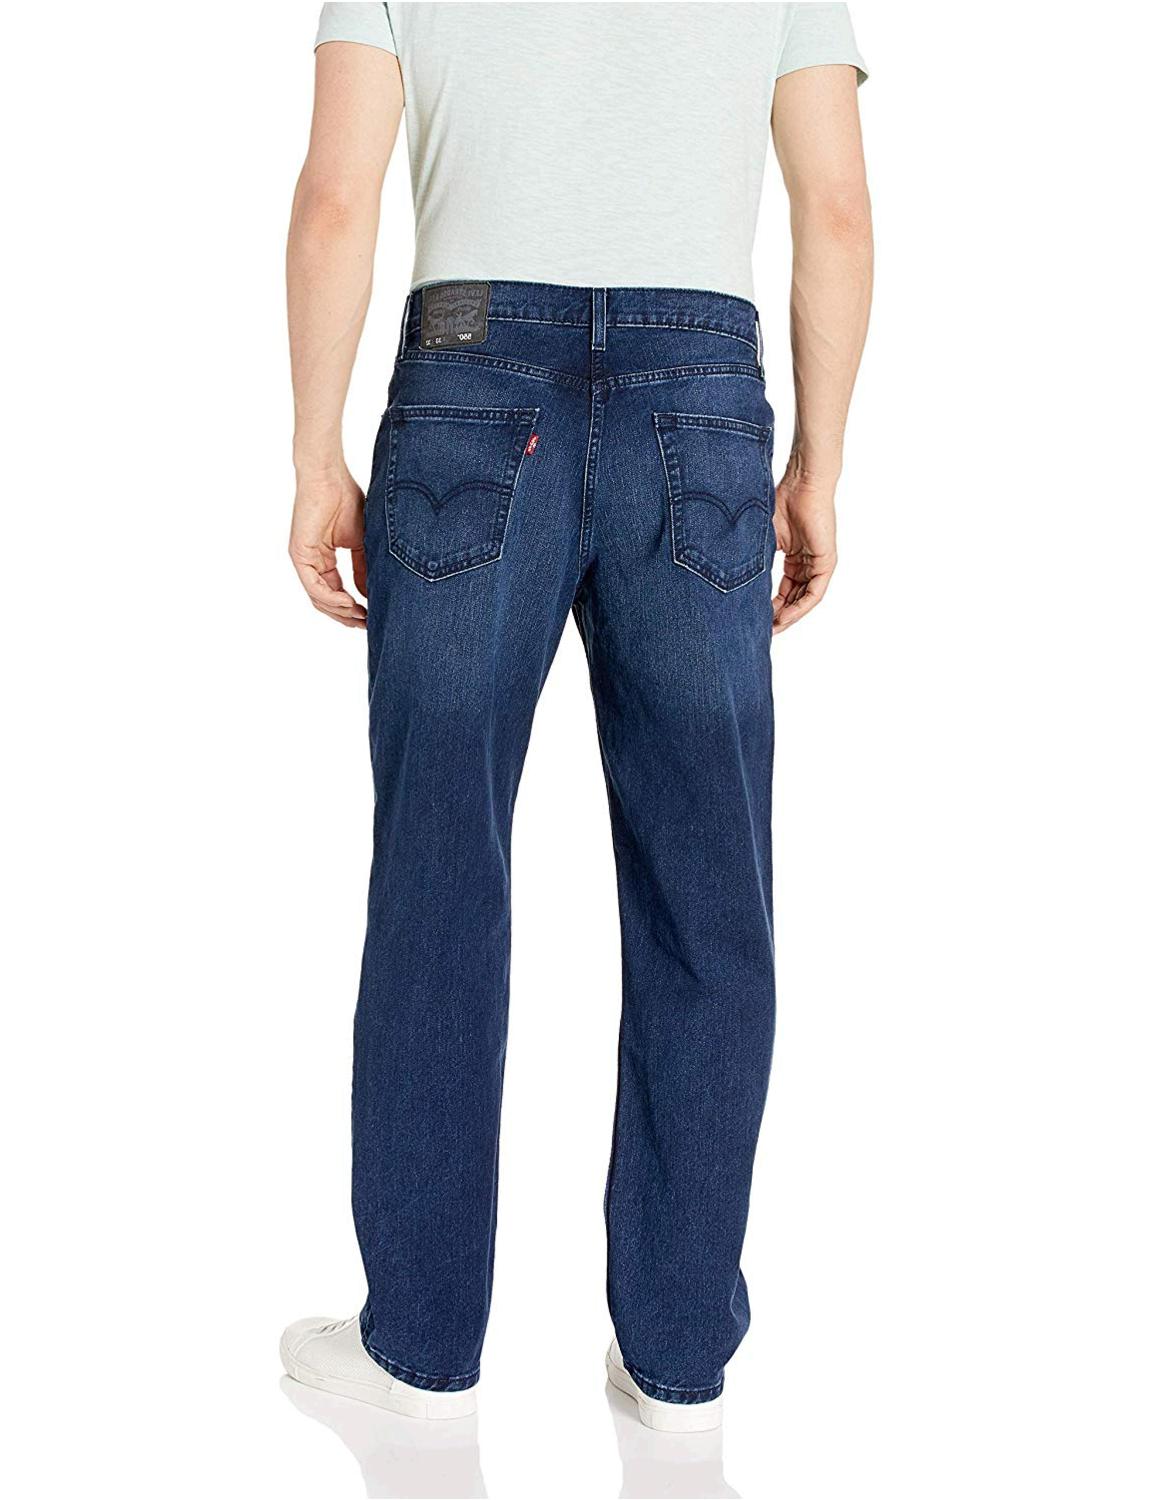 Levi's Men's Big and Tall 550 Relaxed Fit, The Twist - Stretch, Size ...